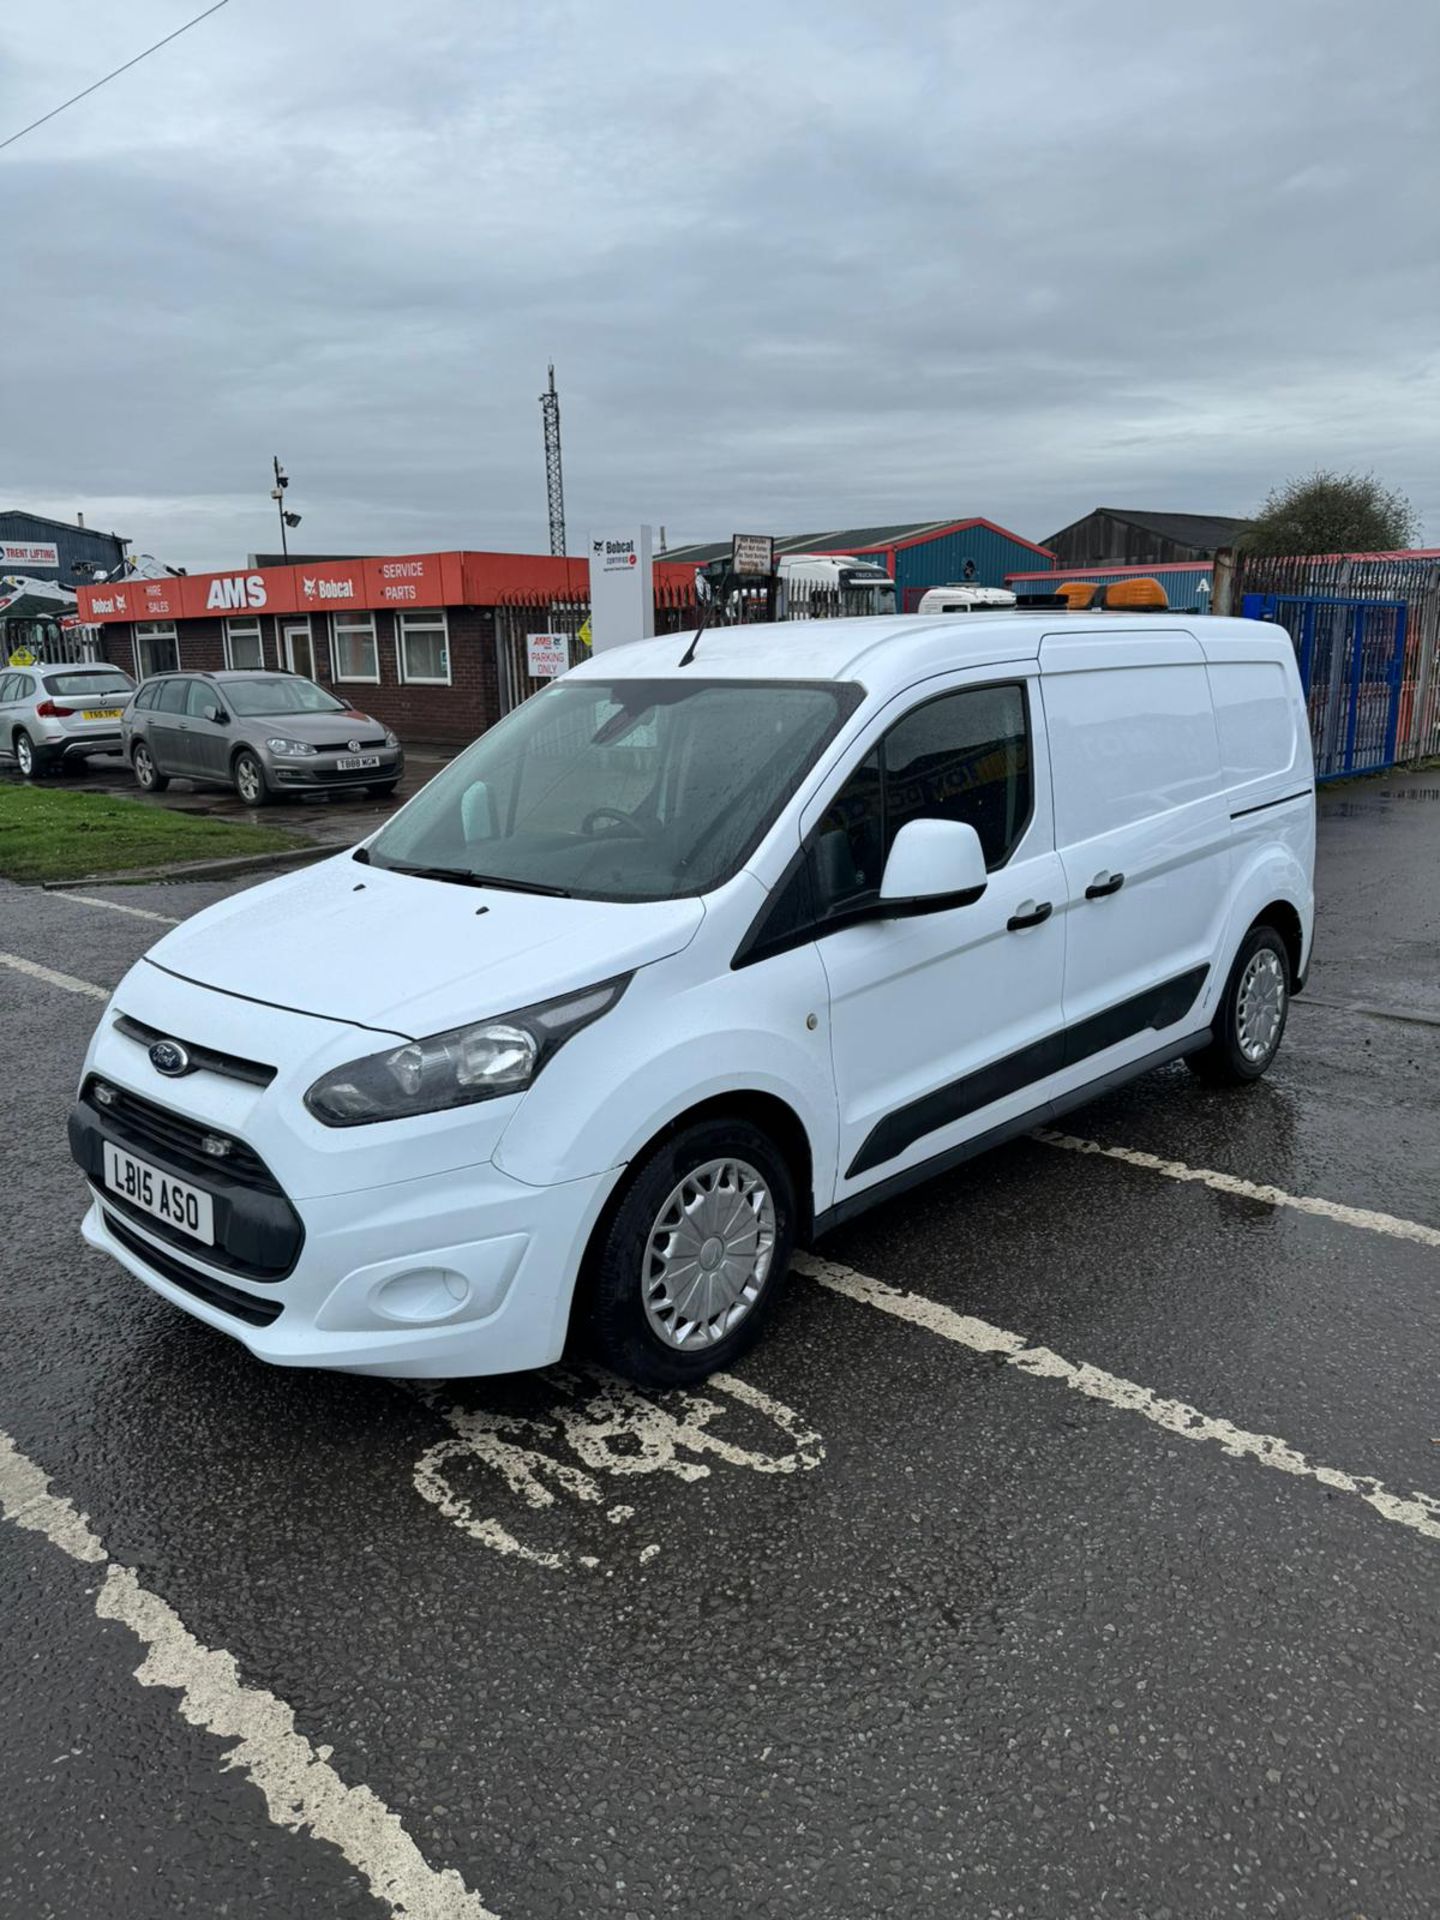 2015 15 FORD TRANSIT CONNECT LWB PANEL VAN - 95K MILES - AIR CON - TWIN SIDE DOORS - EX WATER BOARD - Image 3 of 11